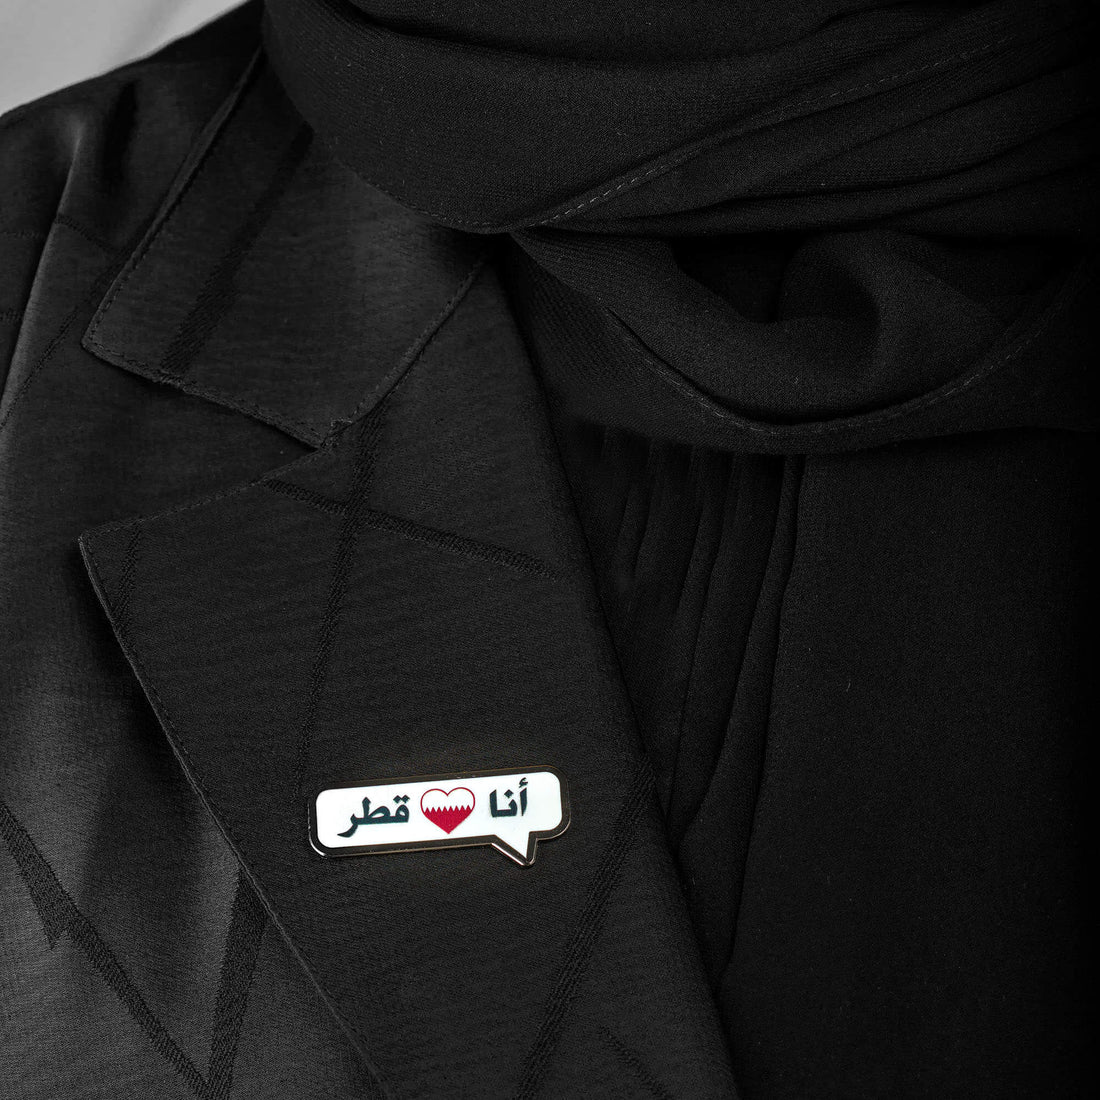 Pin: I love Qatar (available as a pin or clothes magnet)